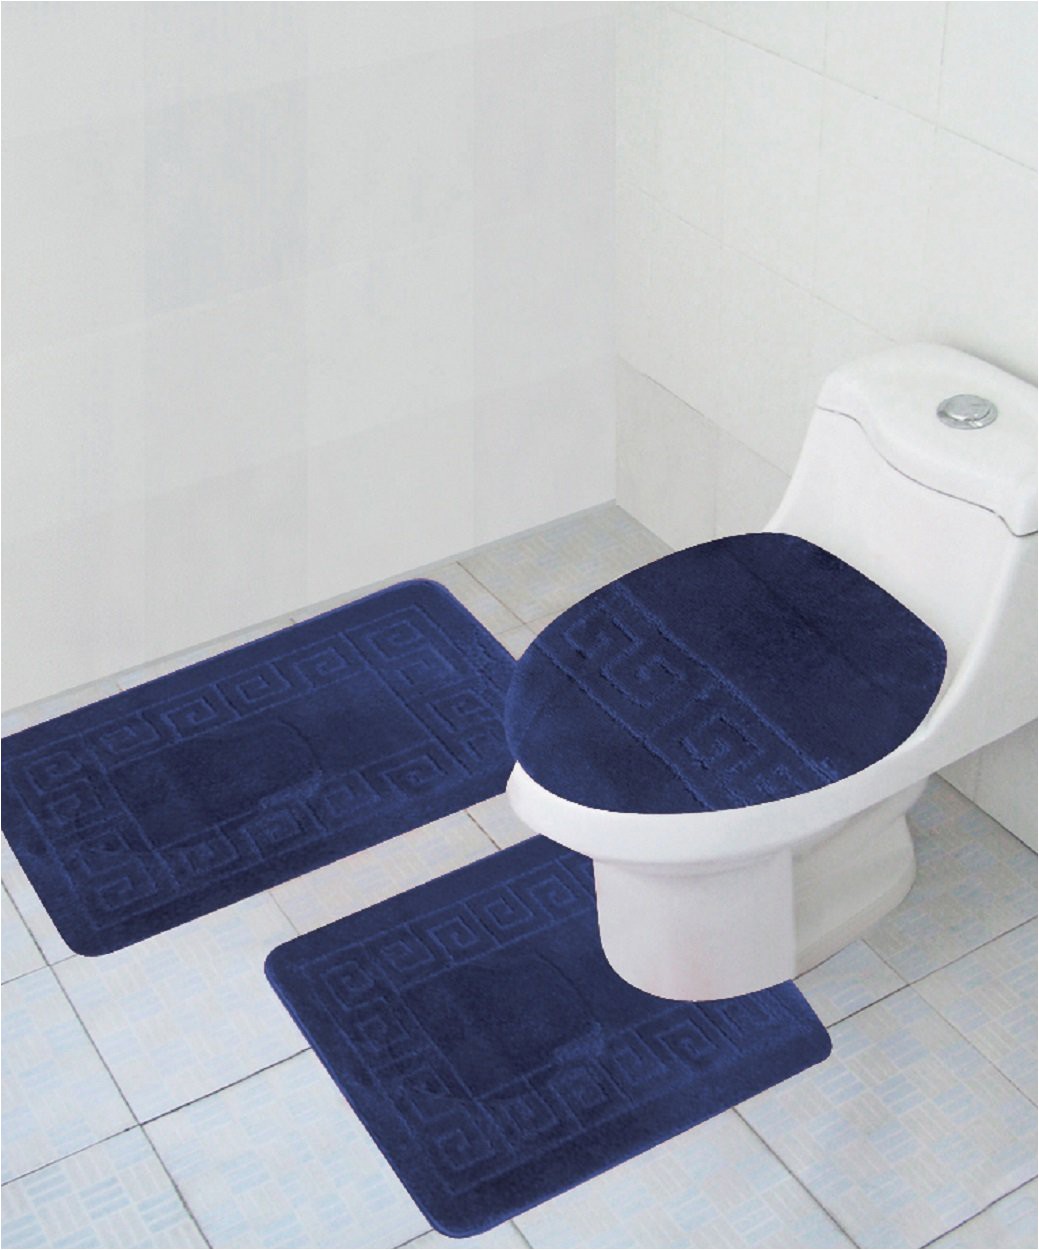 Bathroom Rug Sets Clearance Jcpenney Bathroom Rugs Sets Image Of Bathroom and Closet